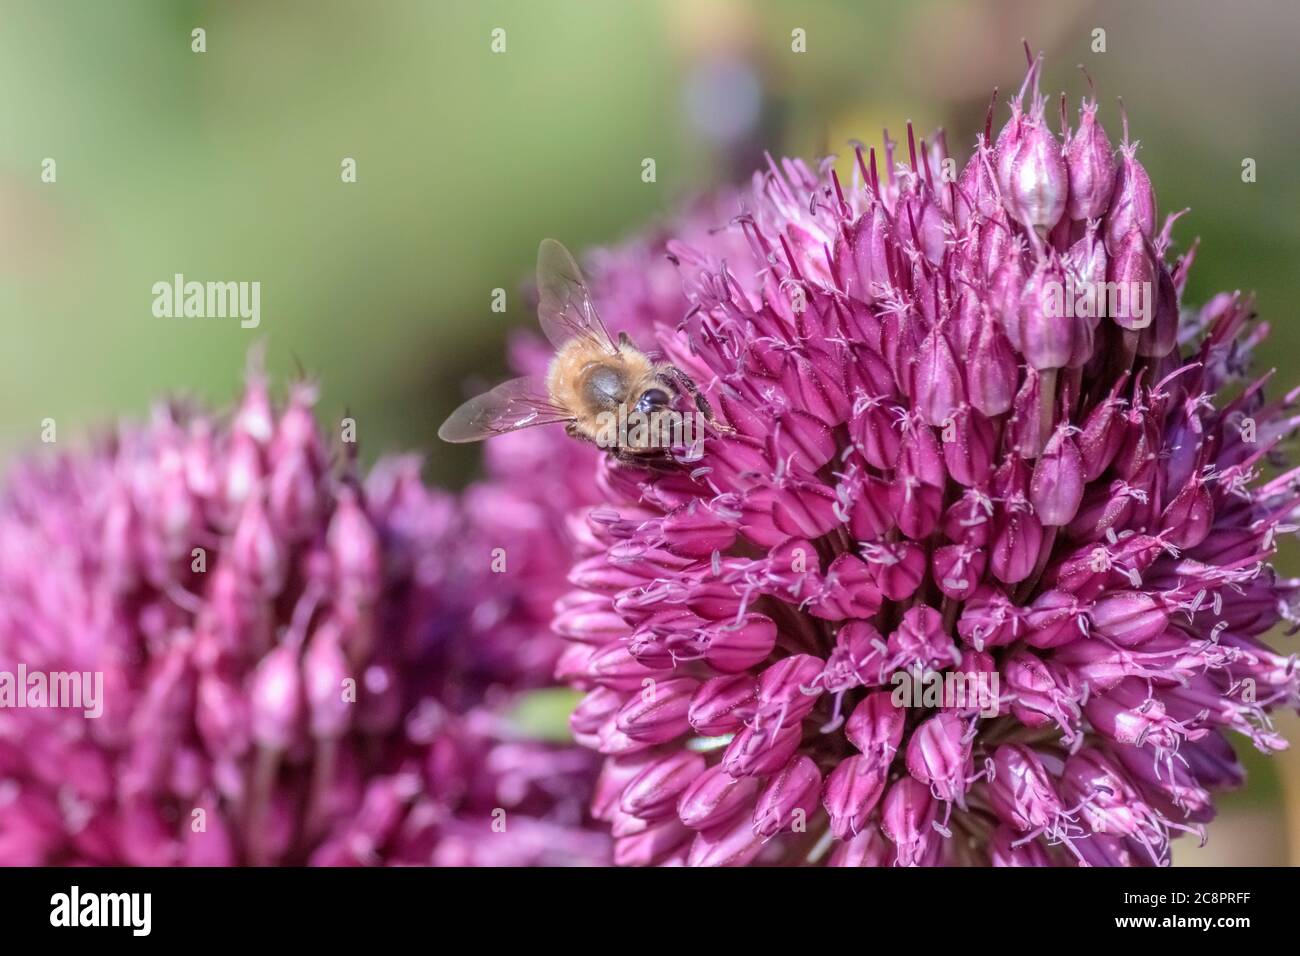 An eye level view, from the front, of a honey bee gathering nectar from a purple Allium sphaerocephalon flowerhead, with a blurred green background. Stock Photo